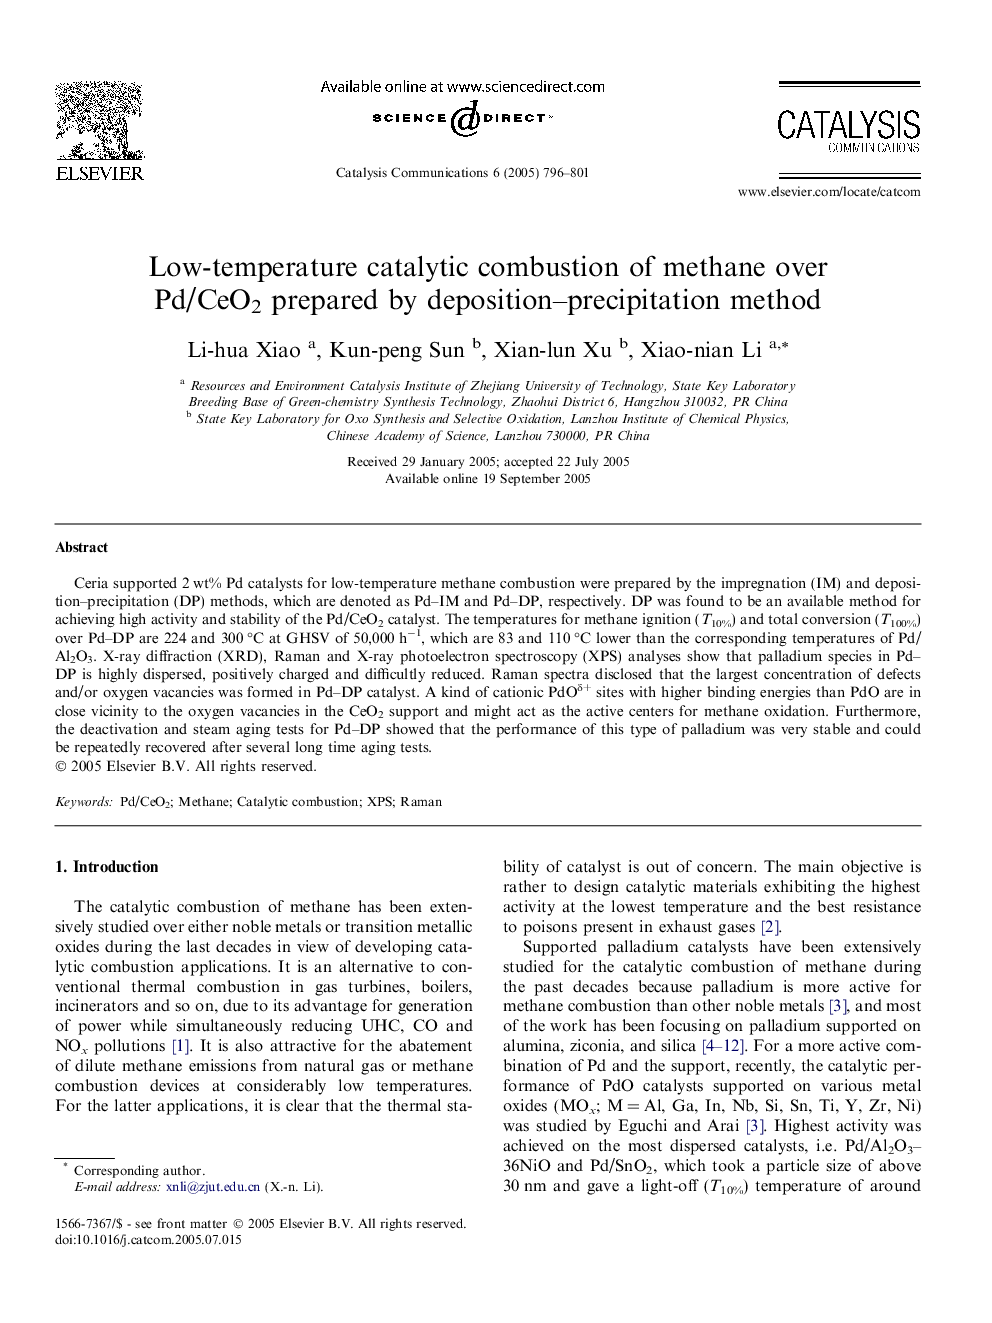 Low-temperature catalytic combustion of methane over Pd/CeO2 prepared by deposition-precipitation method